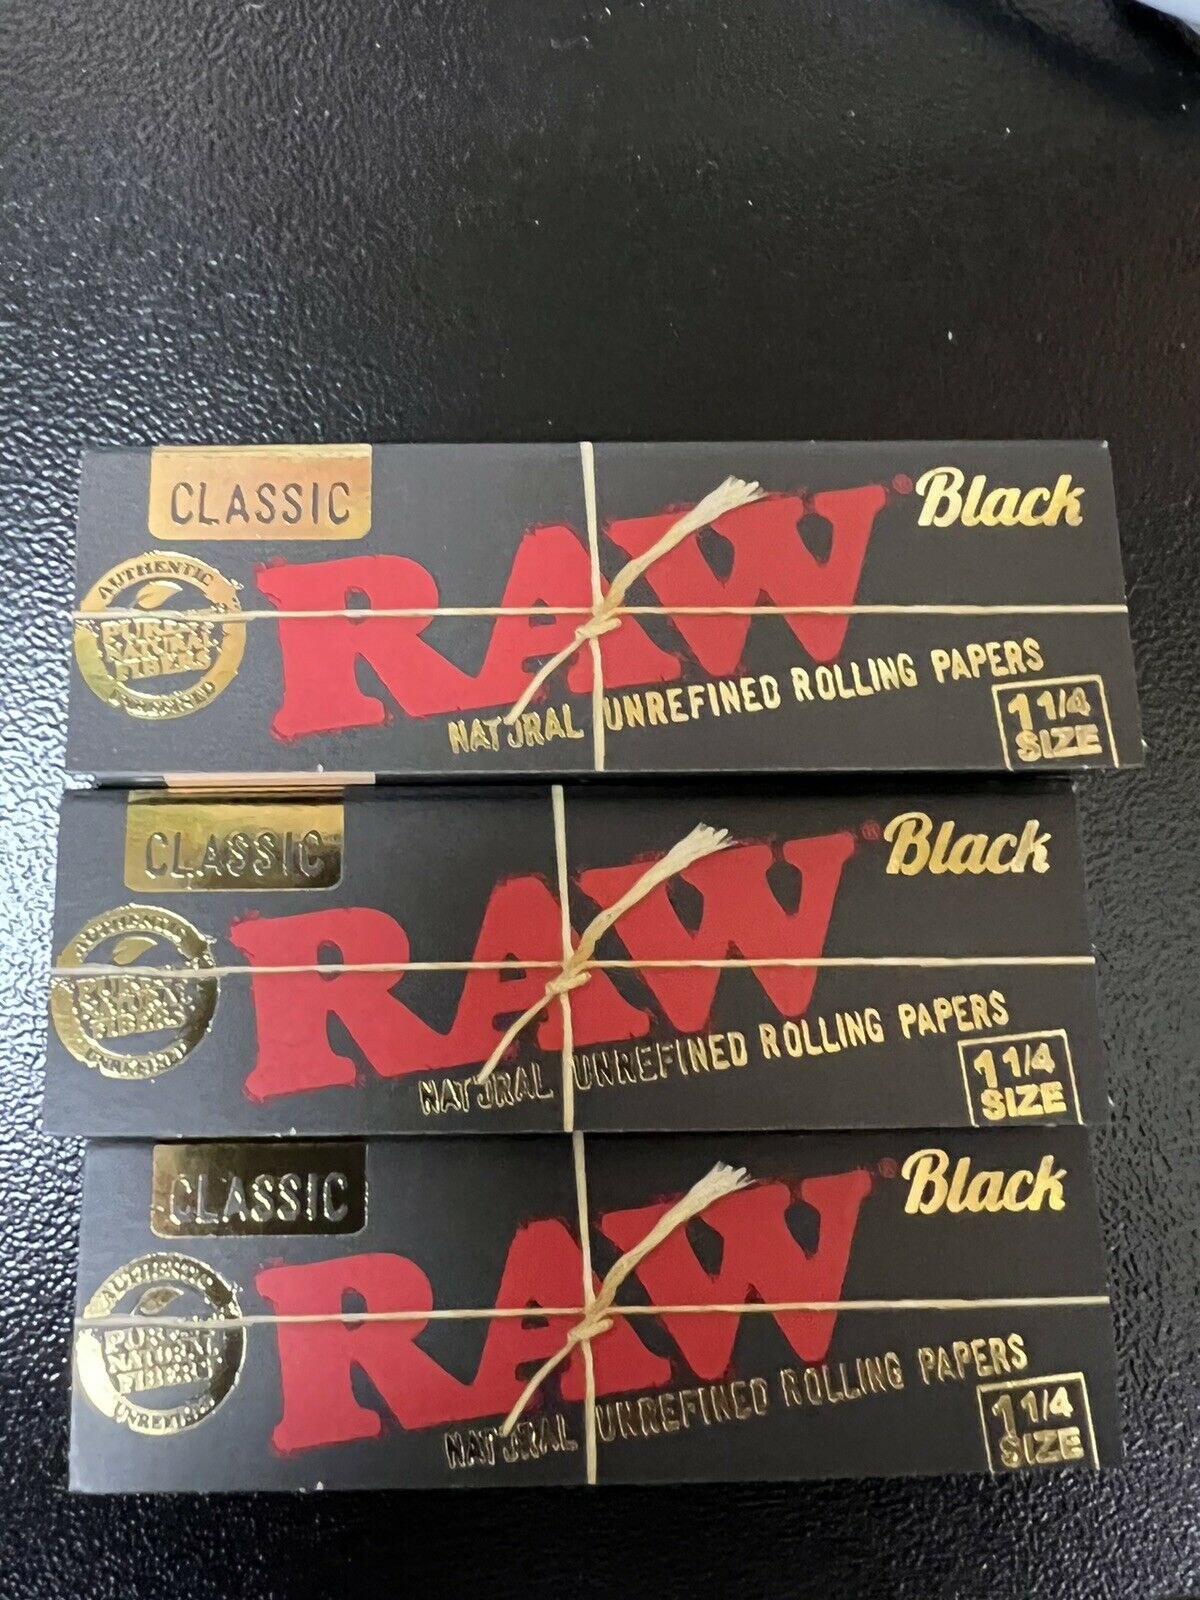 Raw Organic Black 1 1/4 Size 50 Papers Rolling Papers (3 Pack) Flower Power Packages 